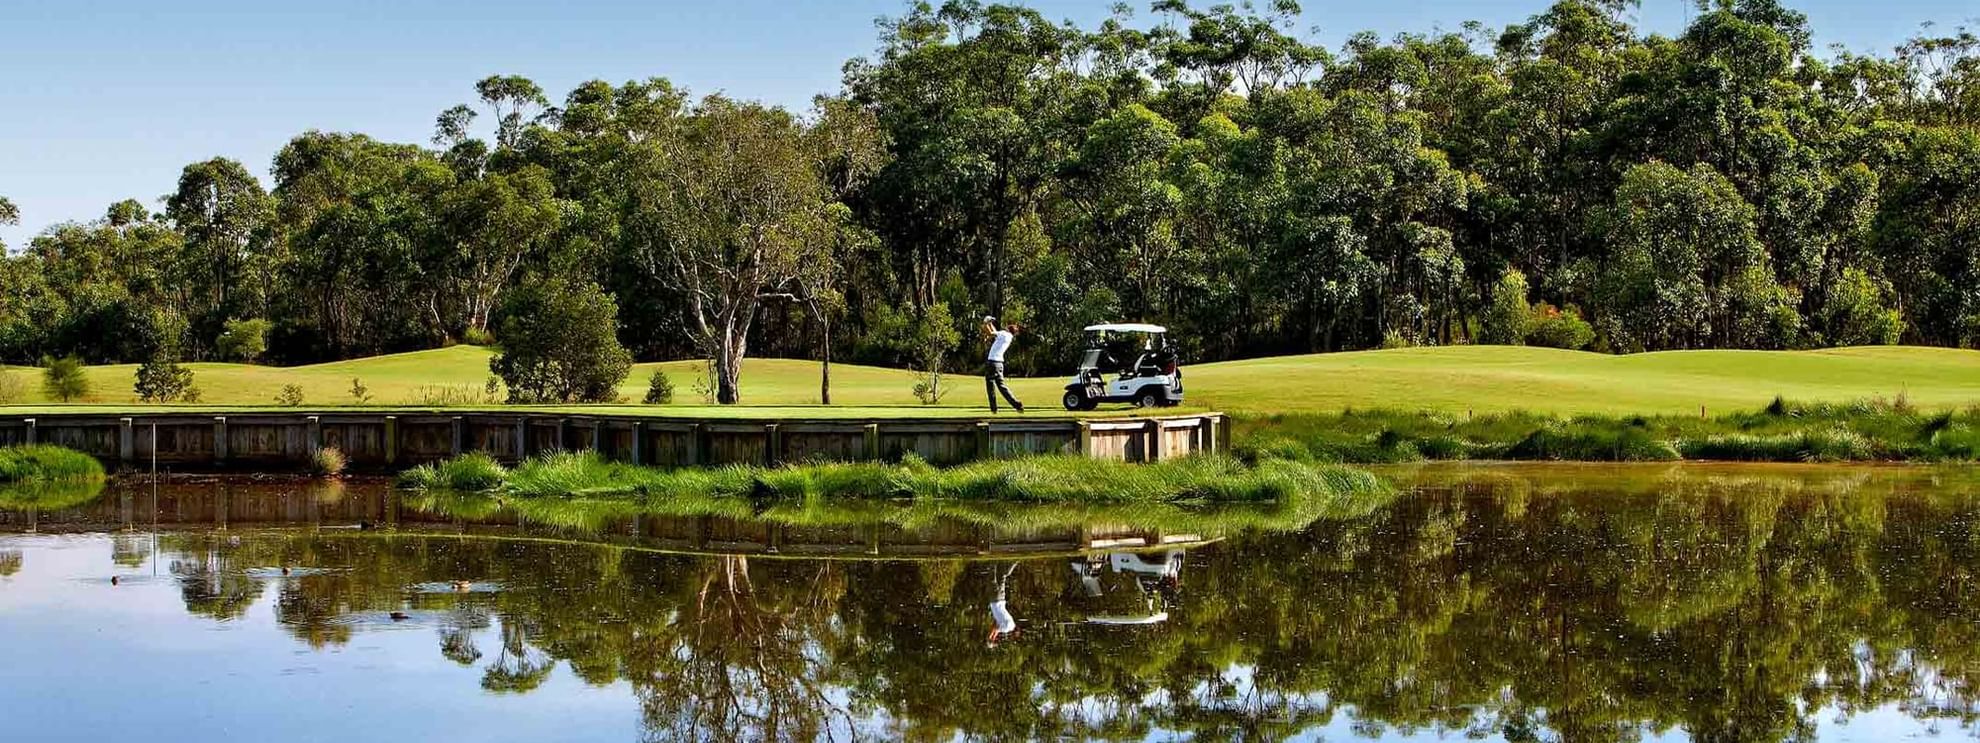 Central coast golf course next to stunning lake and with Golf Bunker